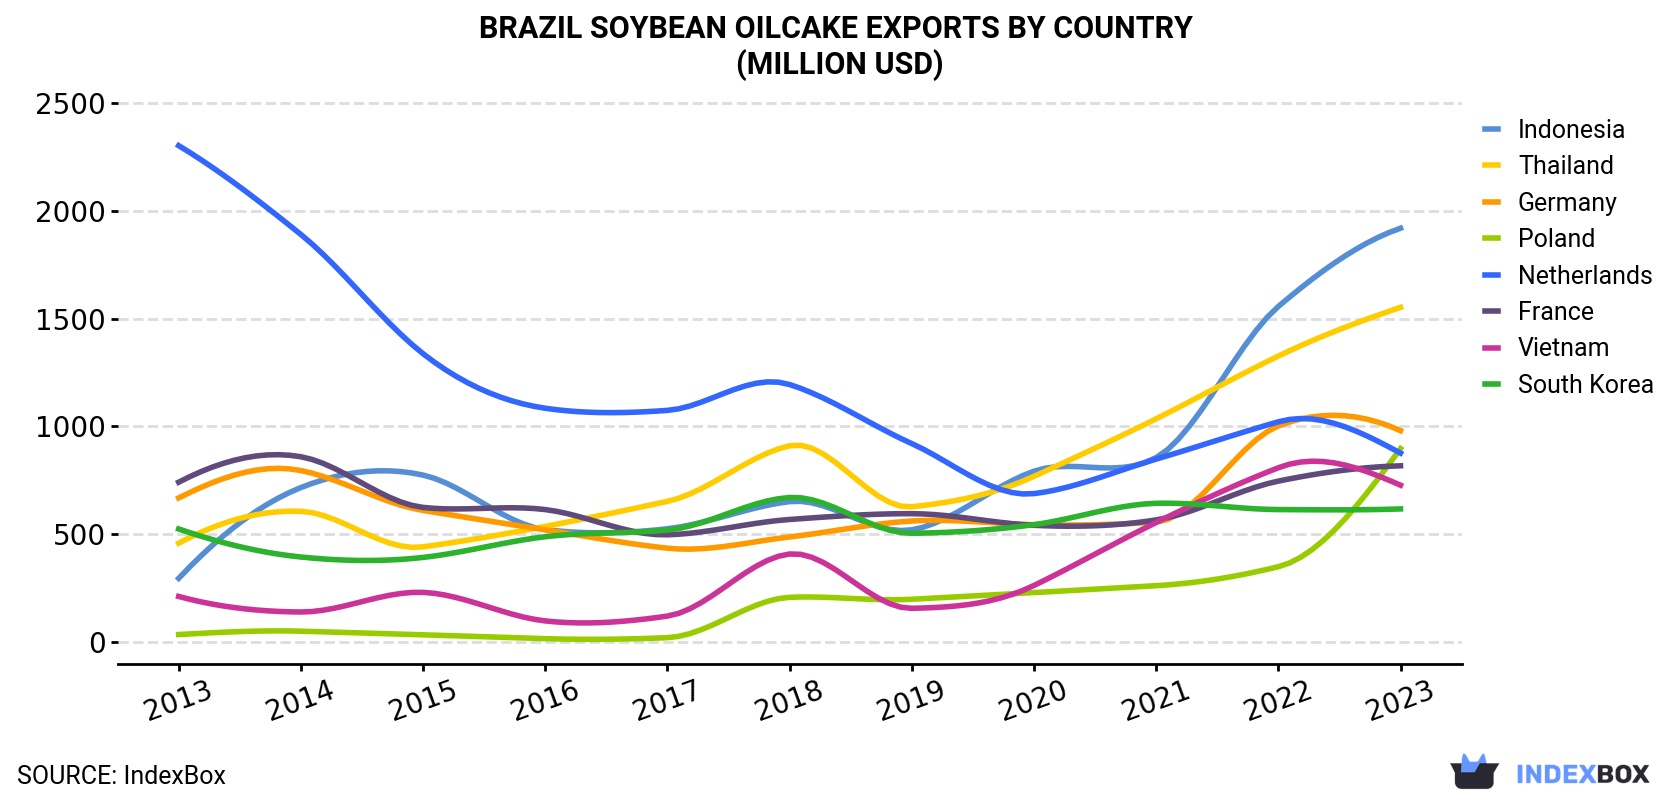 Brazil Soybean Oilcake Exports By Country (Million USD)